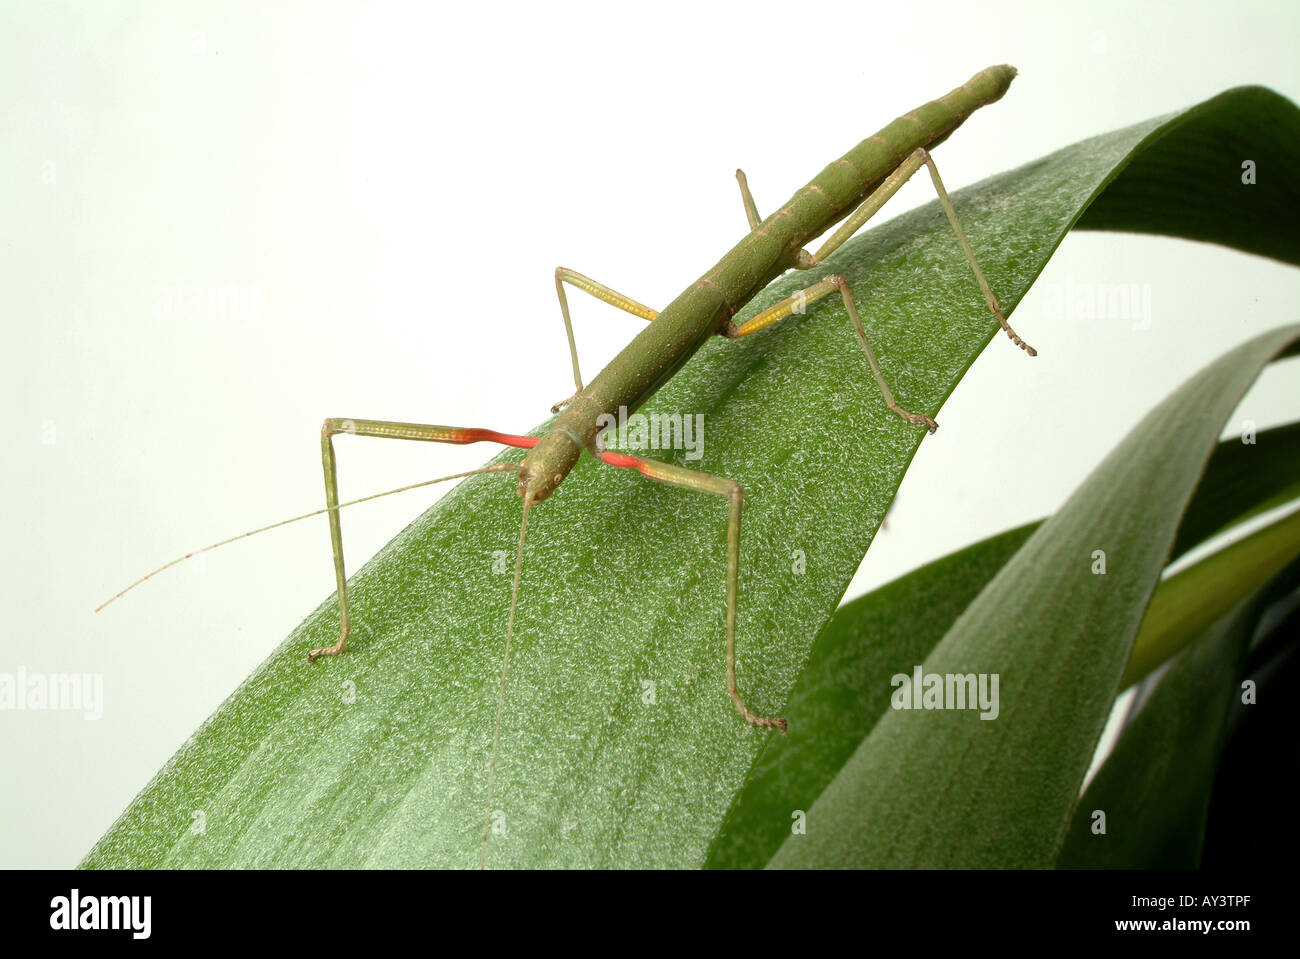 Carausius morosus Indian stick insect Stock Photo